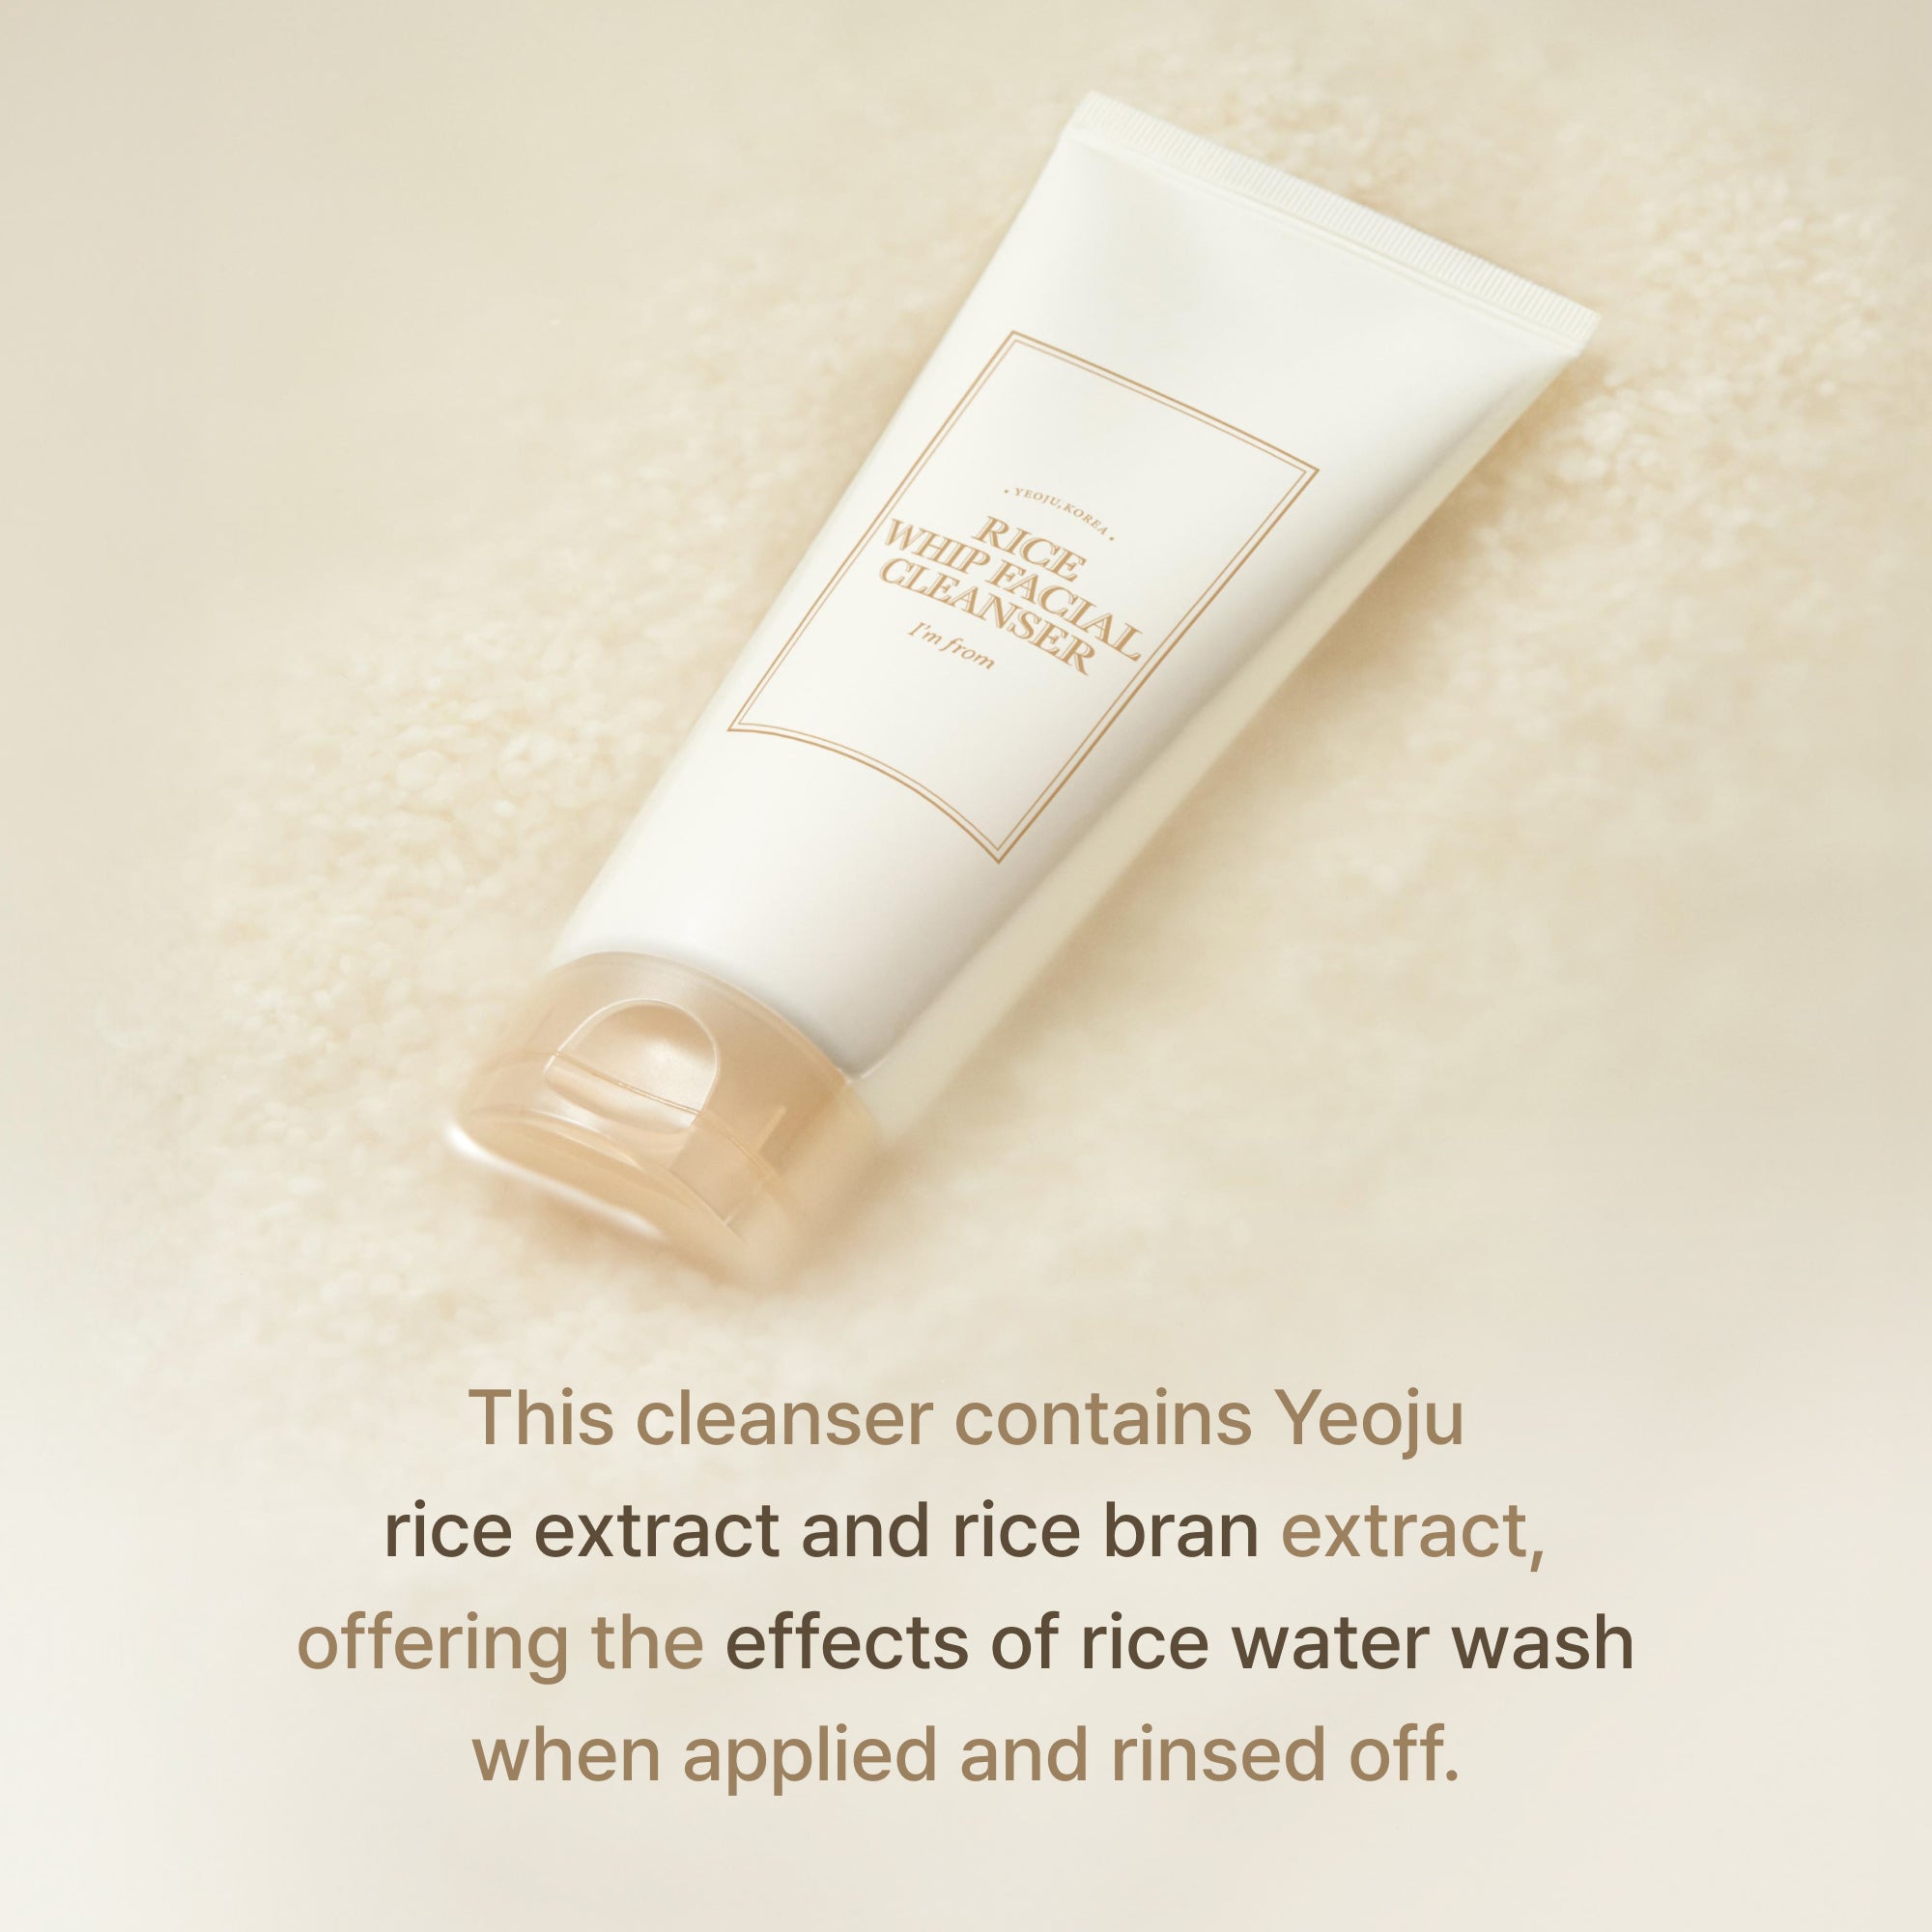 Rice Whip Facial Cleanser